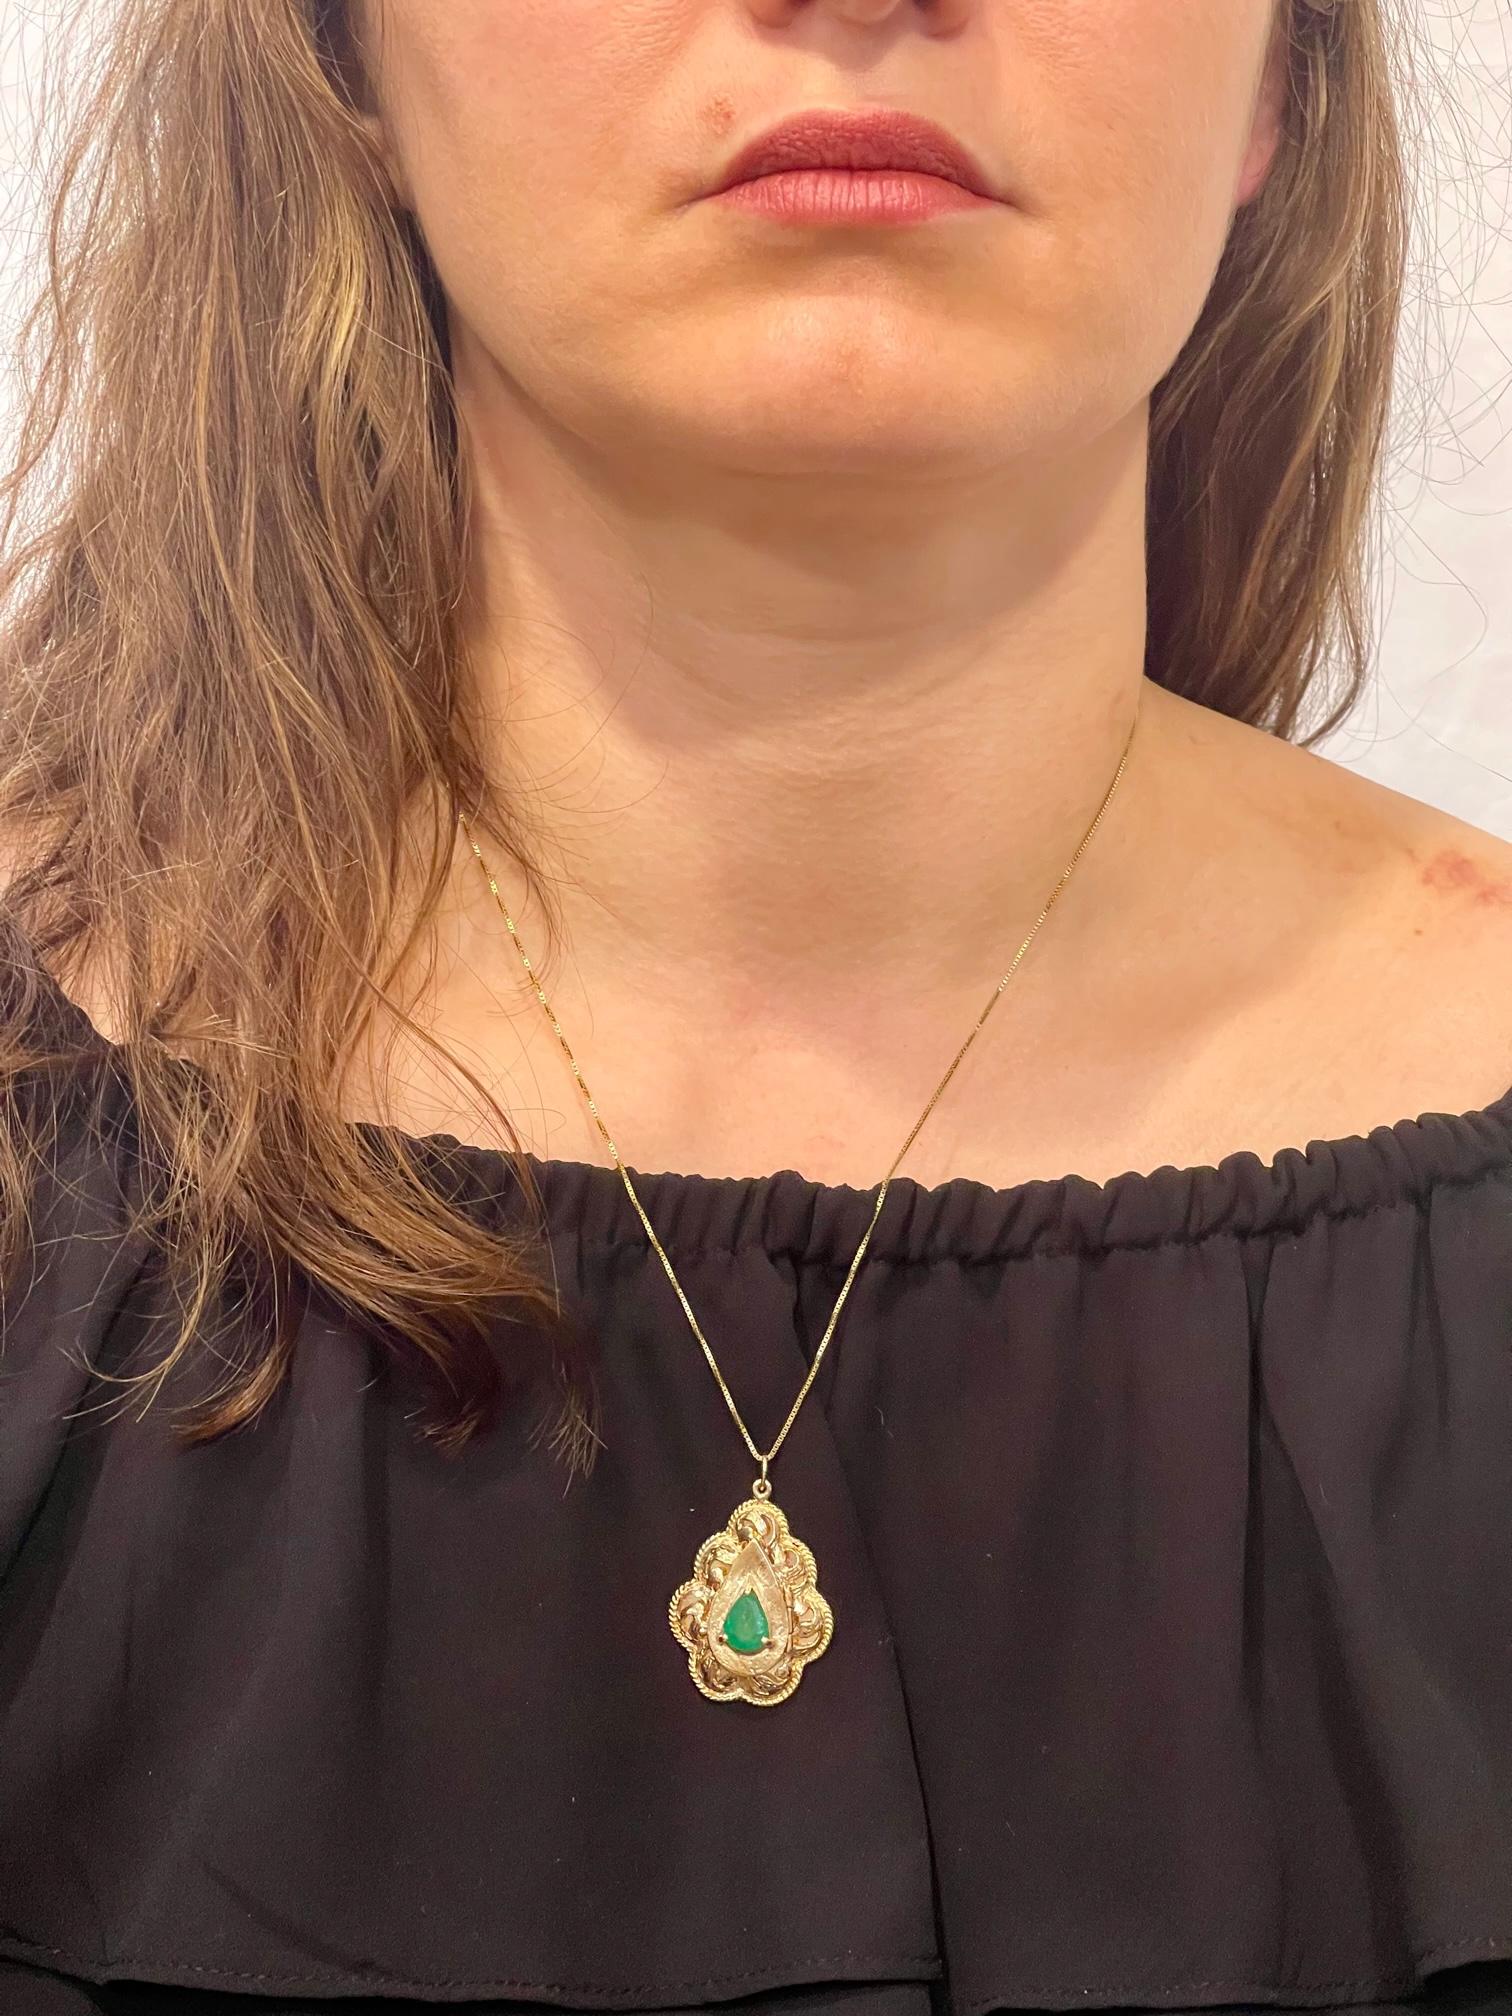 Vintage 14 Karat Yellow Gold 10.5 Gm Chain with  Locket and Natural Emerald
 Locket is 1.5 inch long  and 1.1 Inch wide
22  Inches long with Pendant
Weight of the Necklace is 10.5  Grams 
Natural Brazilian Emerald , Pear shape , approximately 1.8